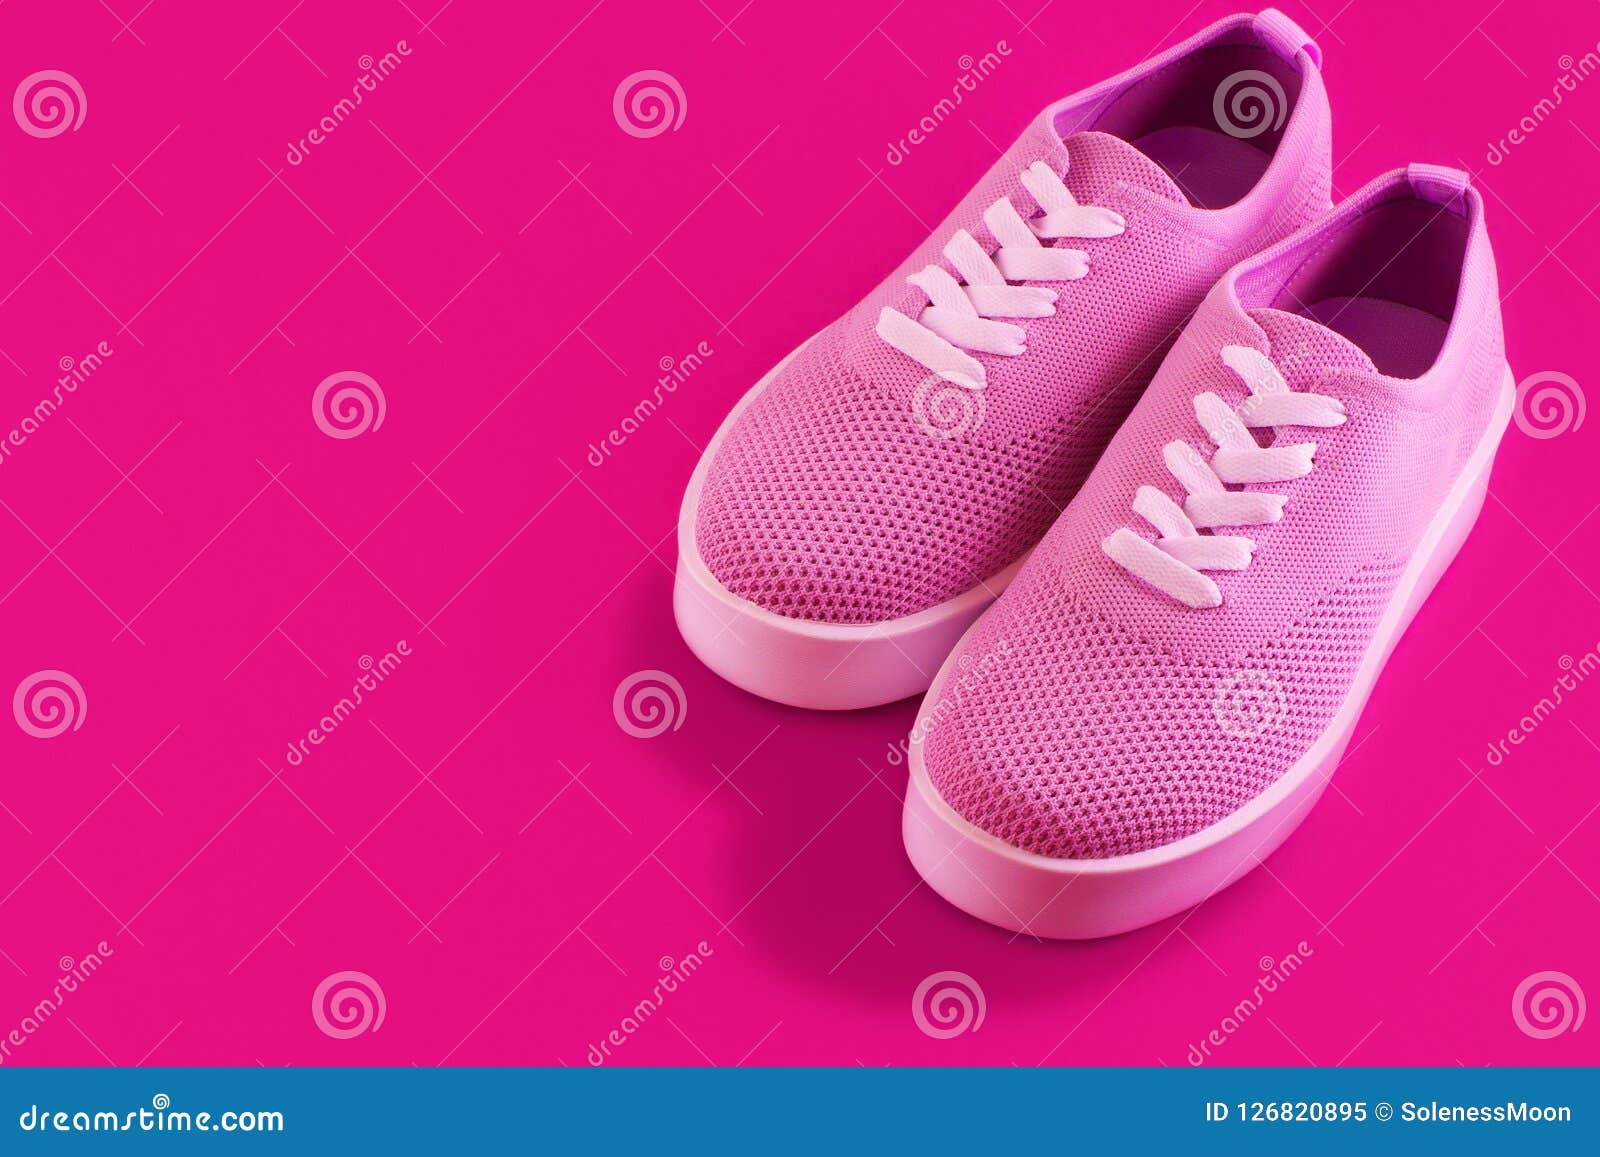 Pink Sneakers On A Bright Fuchsia Background. Stock Image - Image of ...